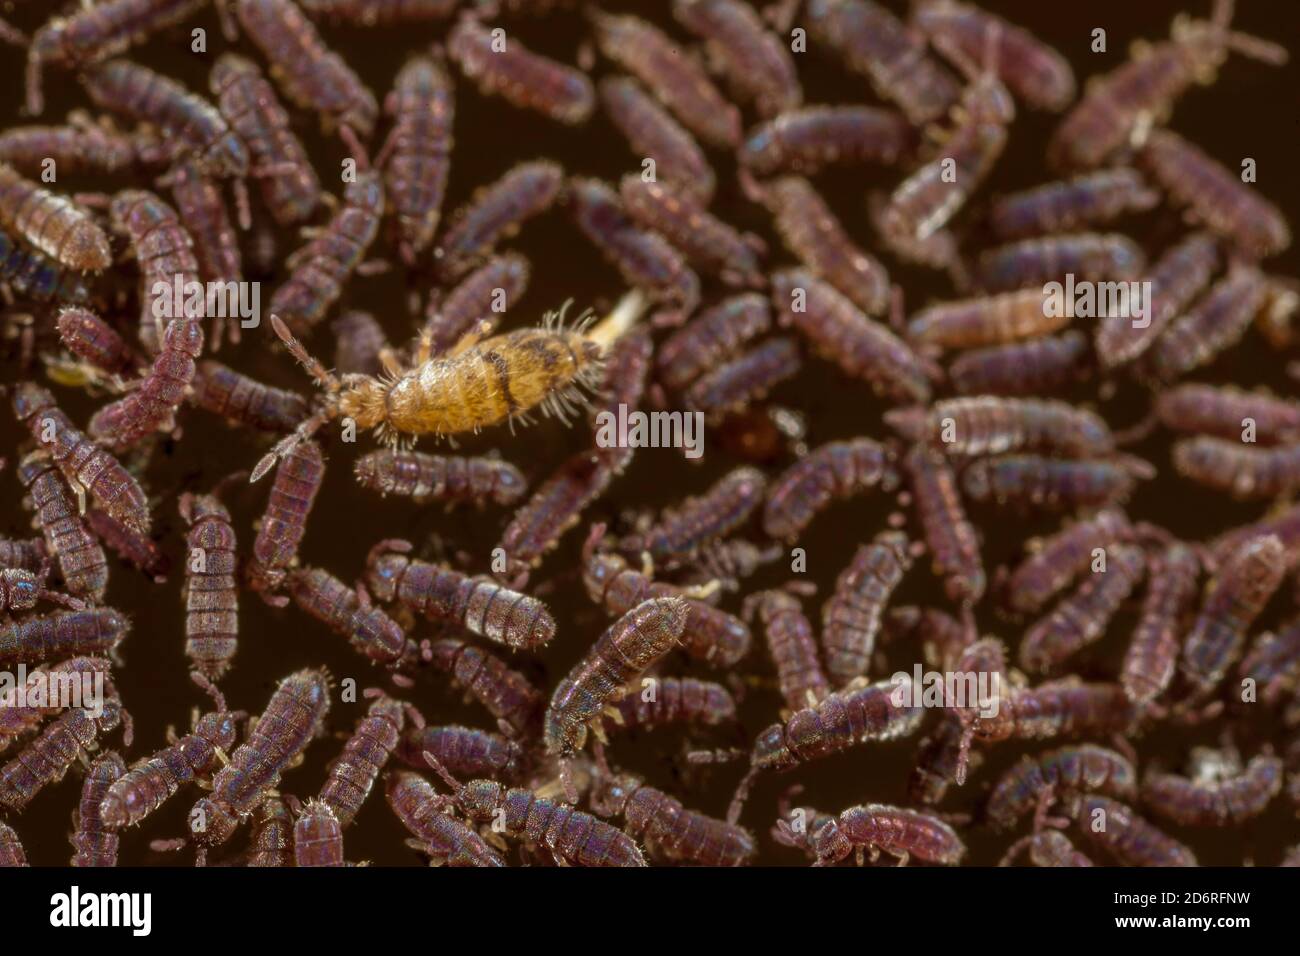 common black freshwater springtail (Podura aquatica), macro shot of an aggregation of black freshwater springtails, Germany Stock Photo